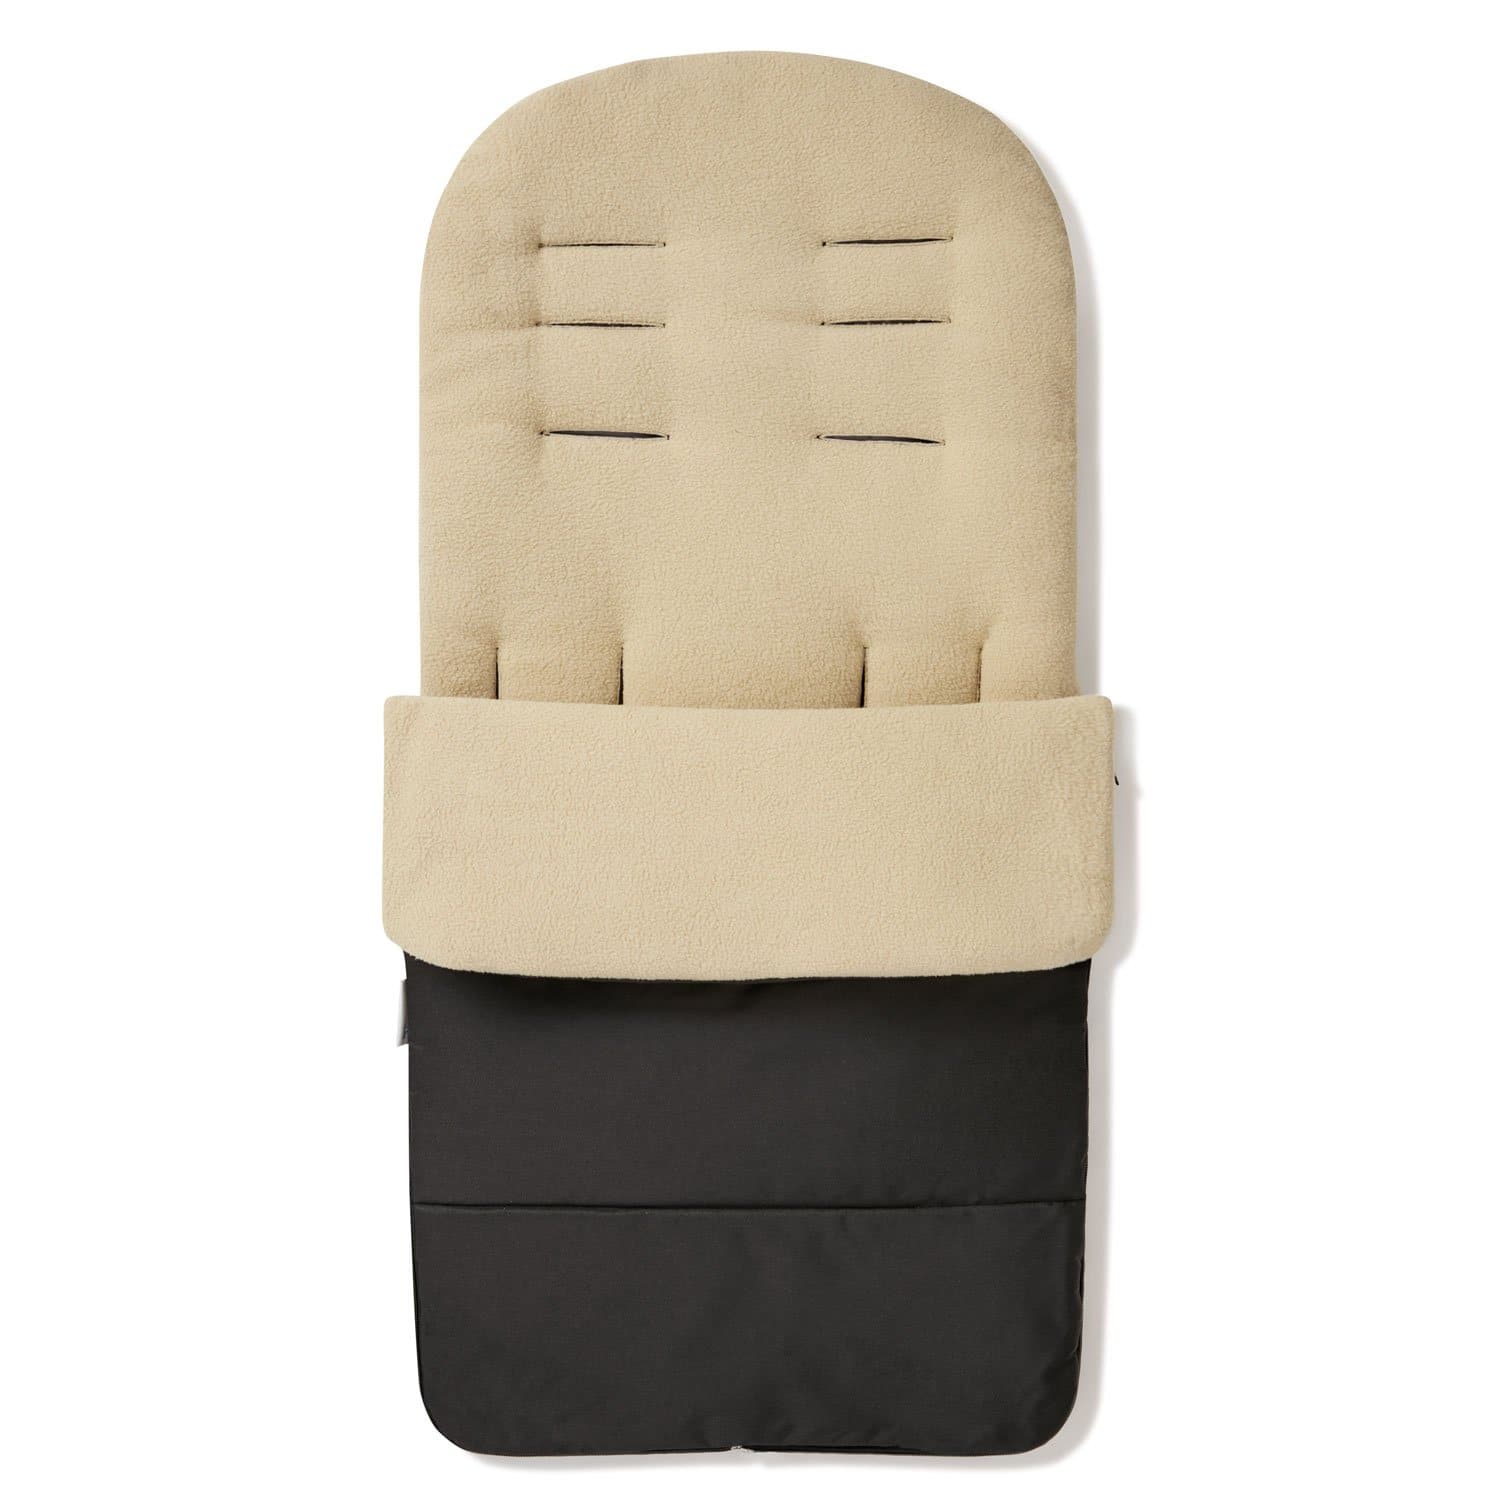 Premium Footmuff / Cosy Toes Compatible with Mutsy - Desert Sand / Fits All Models | For Your Little One